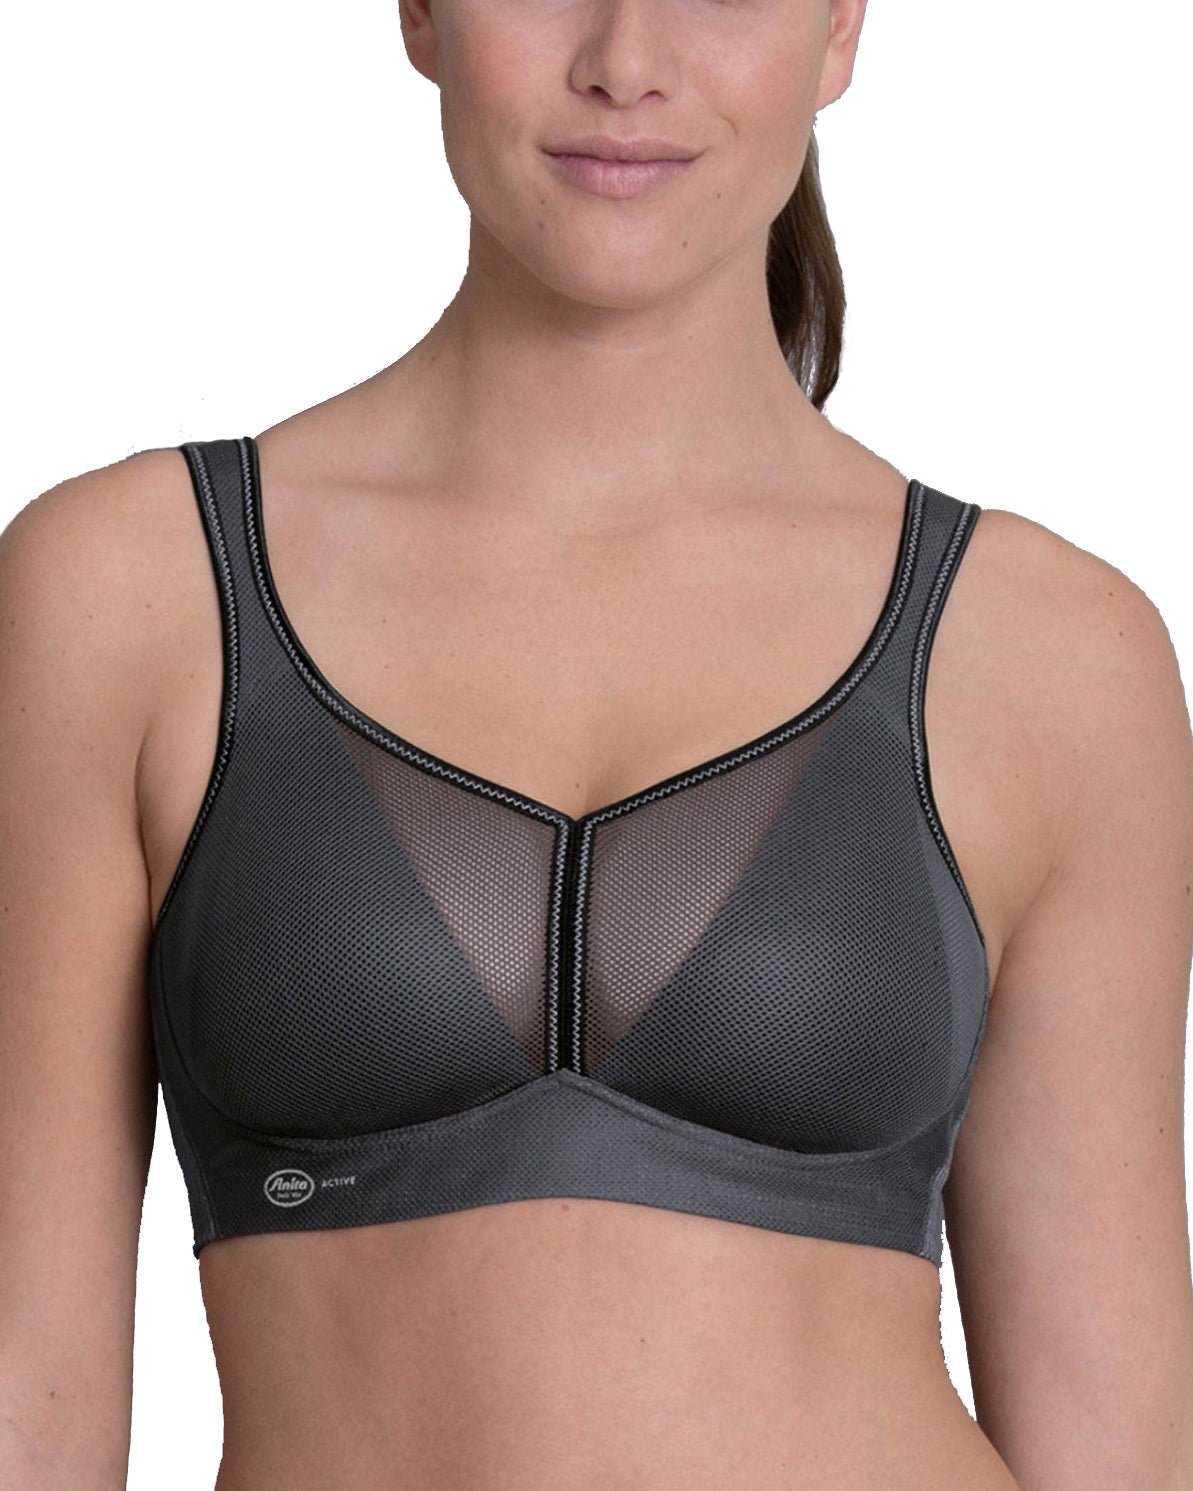 Anita Clara 5859-612 Women's Crystal Non-Wired Moulded Comfort Bra 34C at   Women's Clothing store